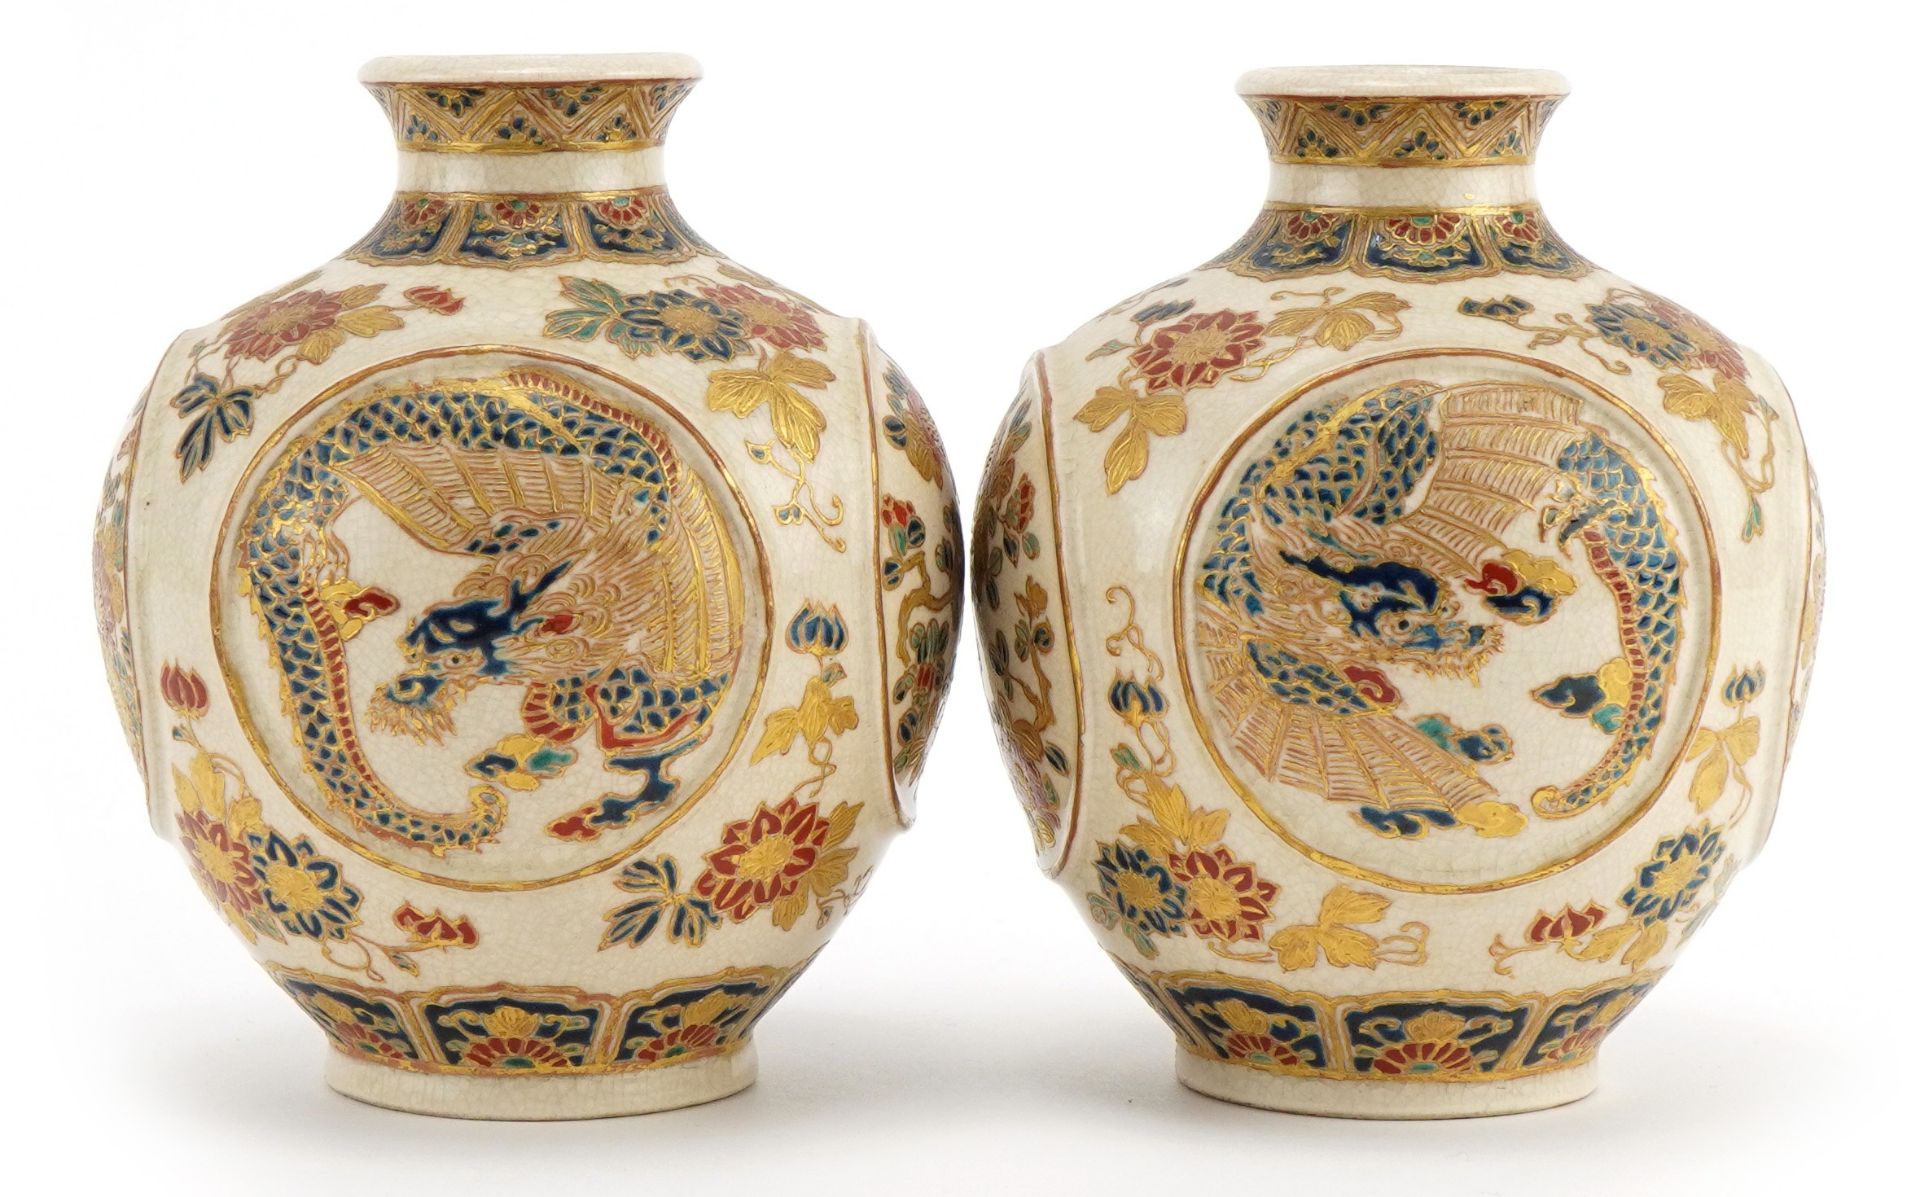 Pair of Japanese Satsuma pottery vases finely gilded with panels of dragons and flowers, character - Image 2 of 6